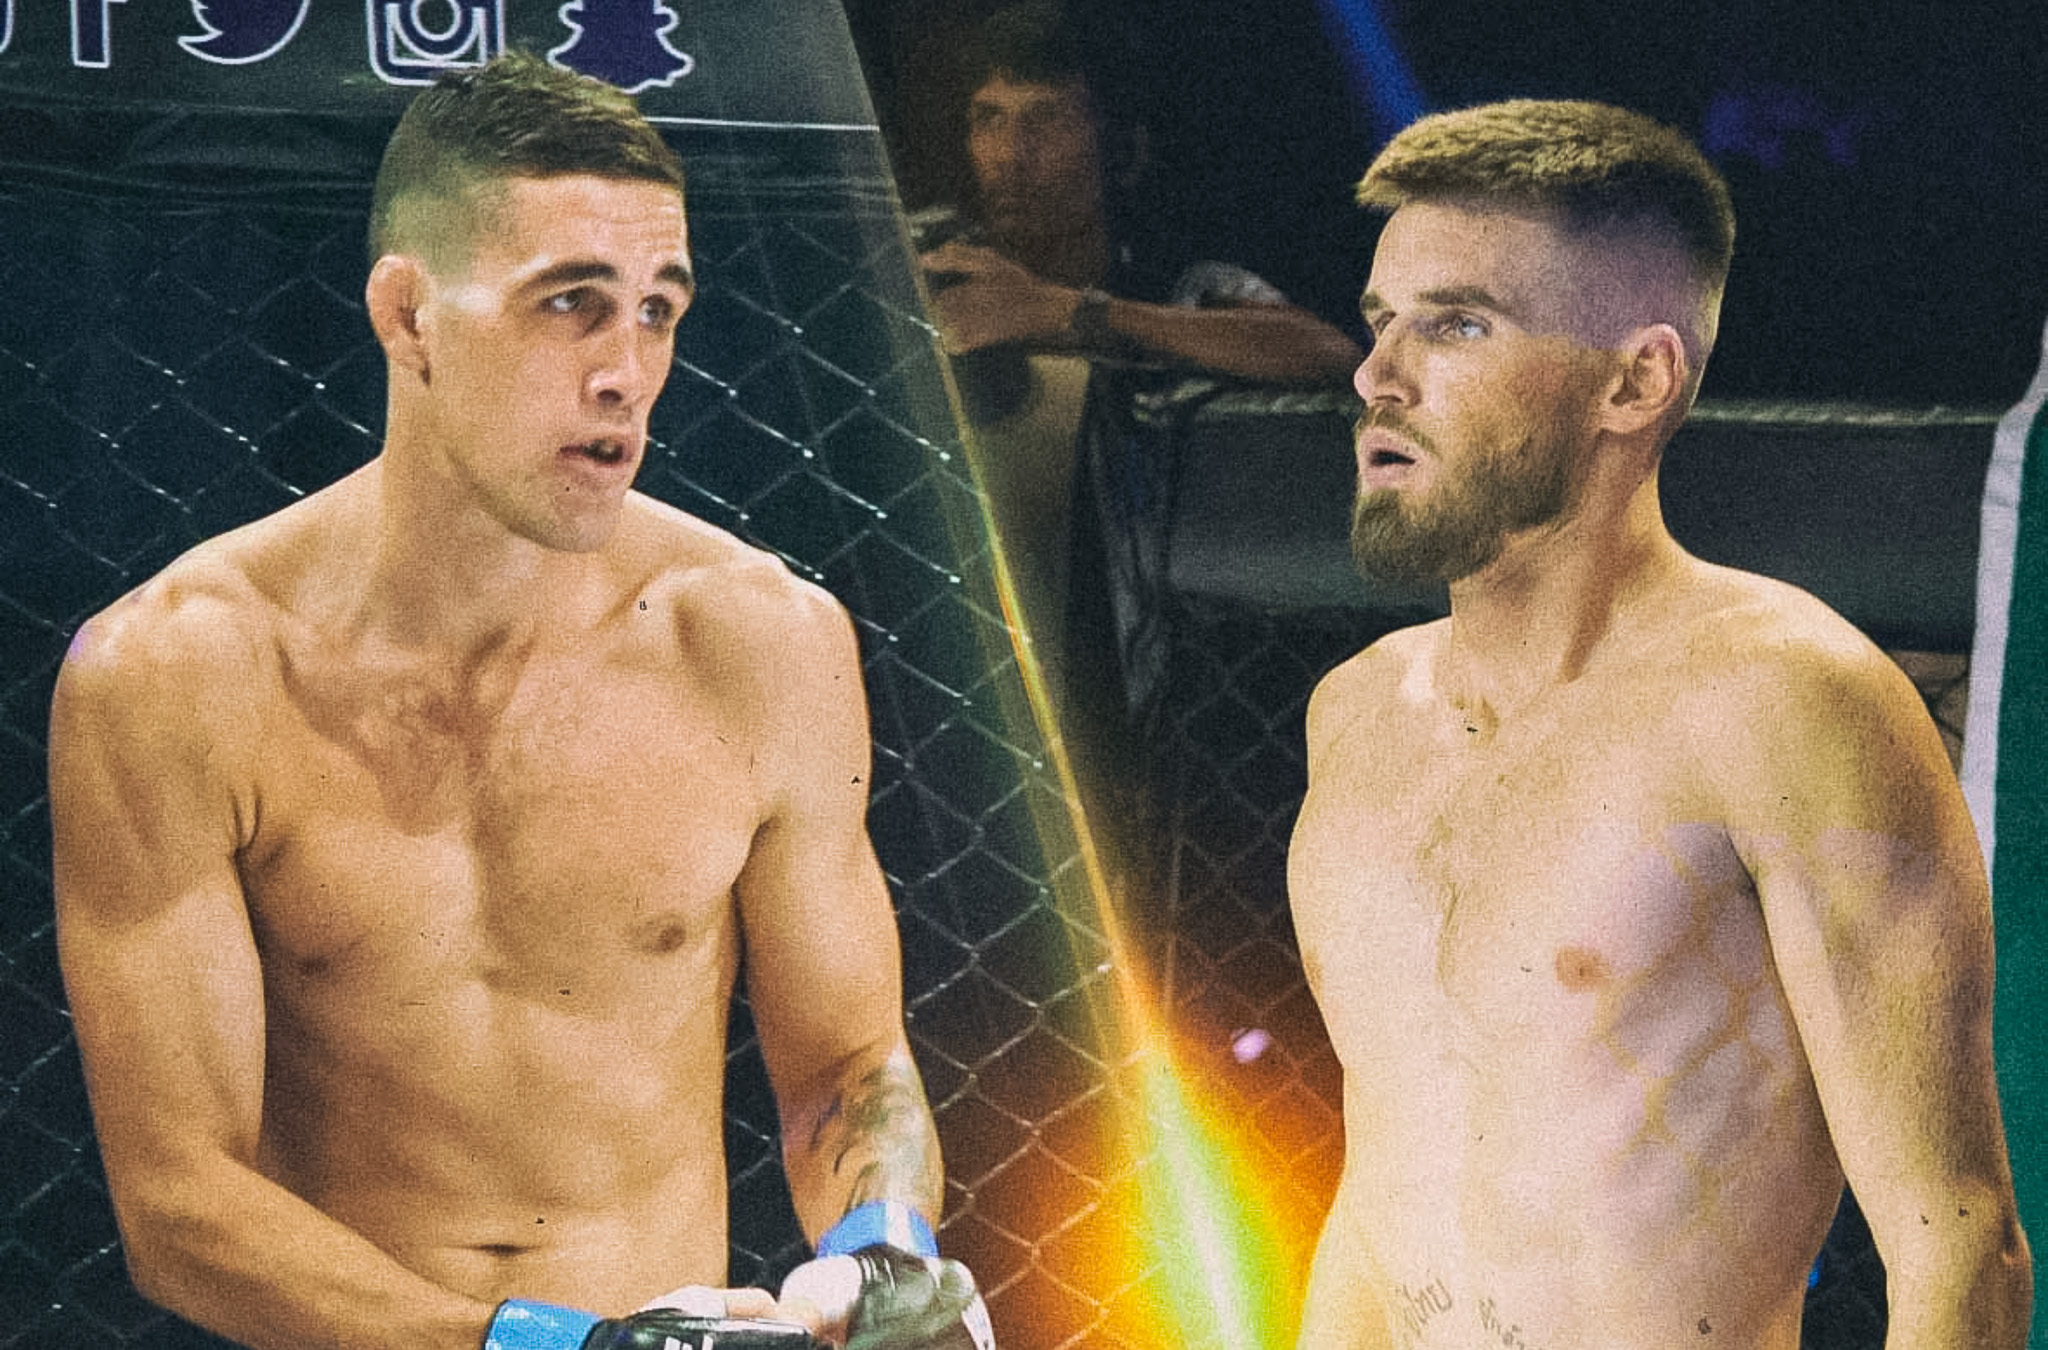 Cowley vs. Brewin is a must-watch at Brave 22 in Manila